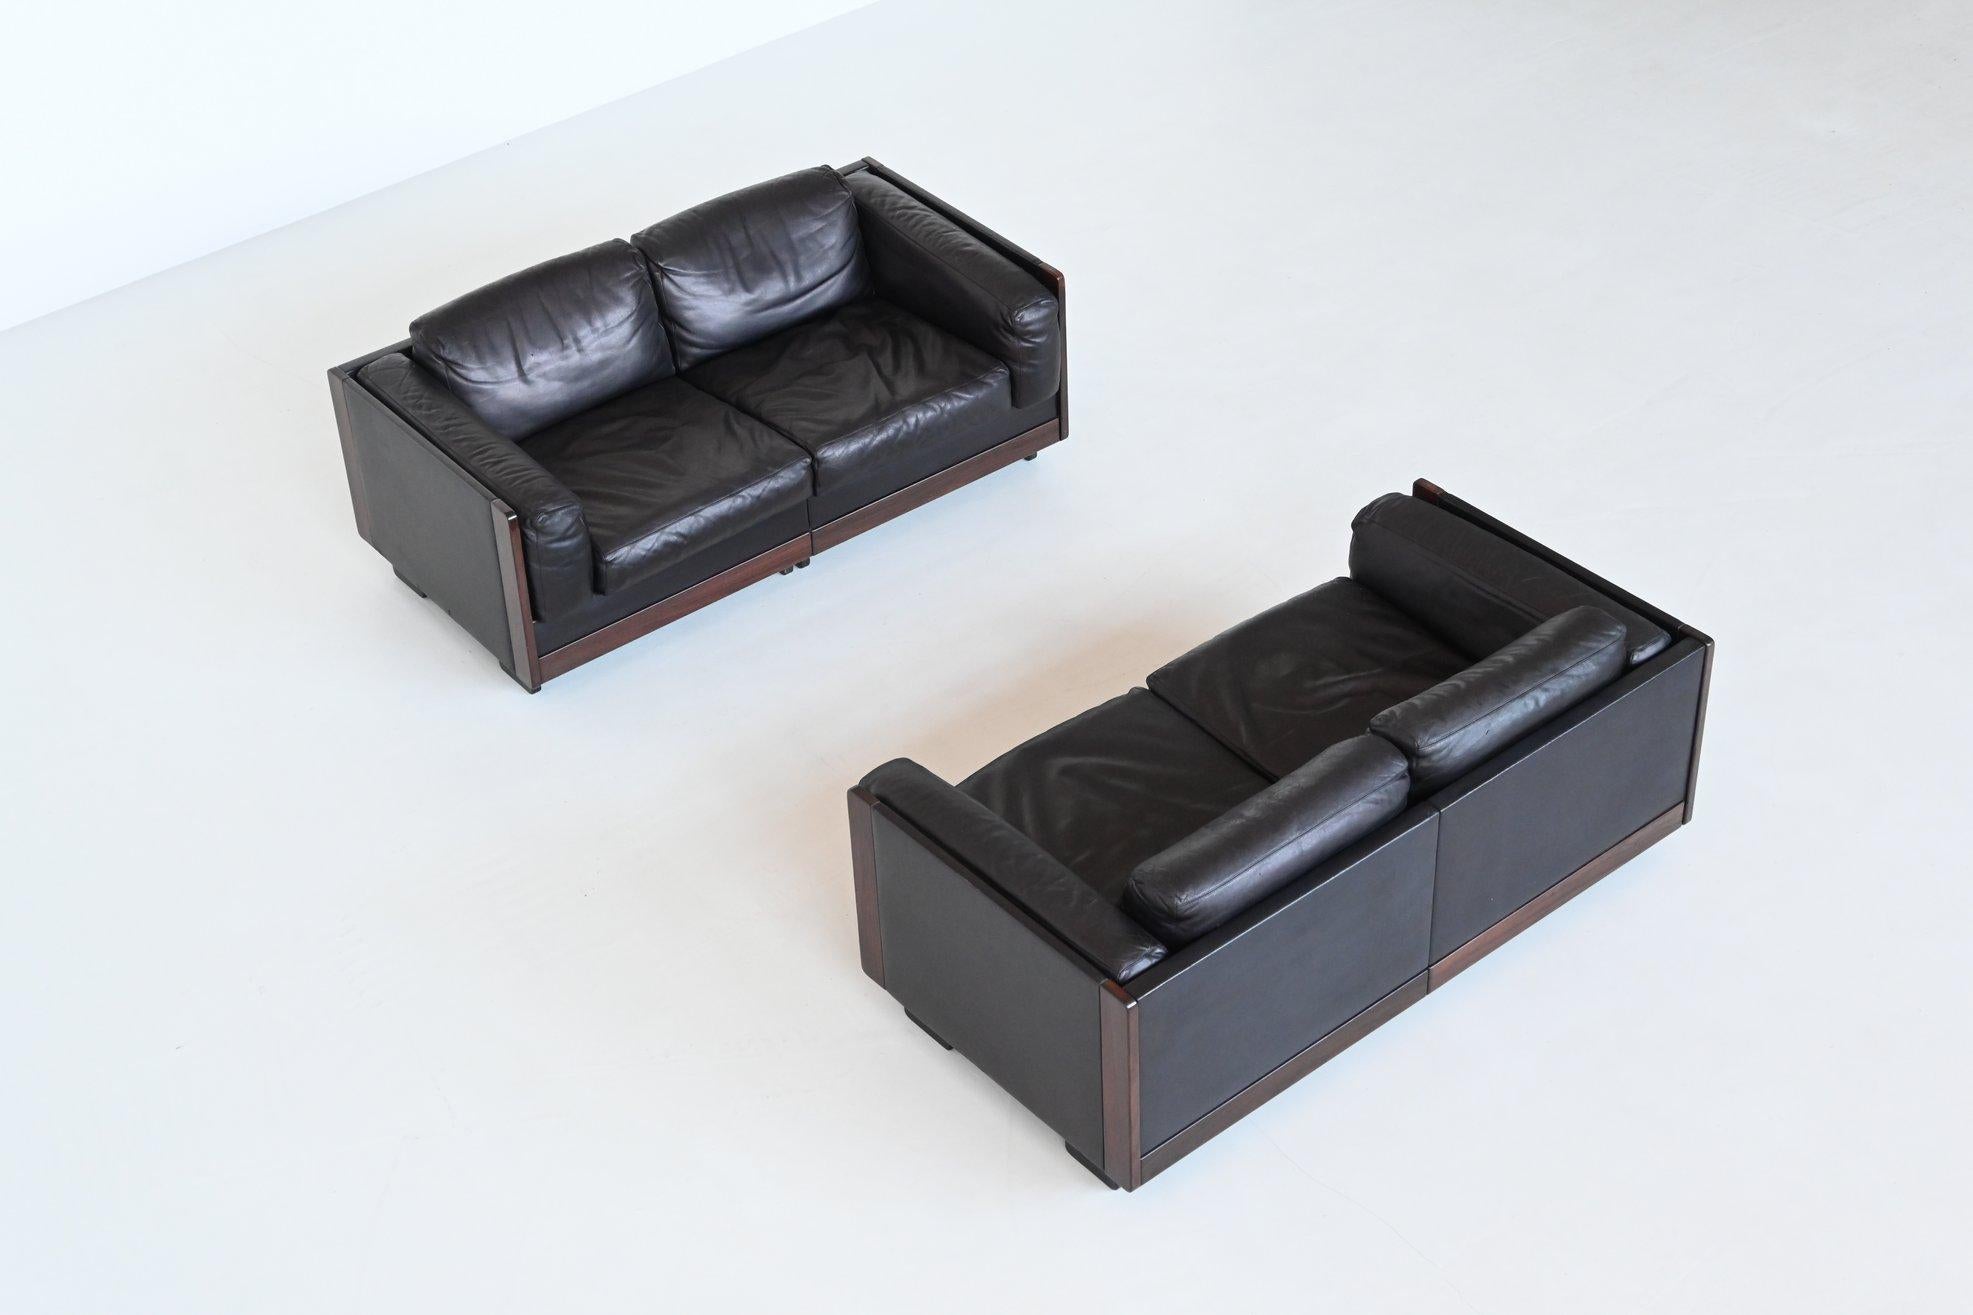 High quality two-seat sofa set model 920 designed by Afra and Tobia Scarpa and manufactured by Cassina, Italy 1966. Afra and Tobia Scarpa started their collaboration with the Italian manufacturer Figli di Amedeo Cassina, designing an iconic series